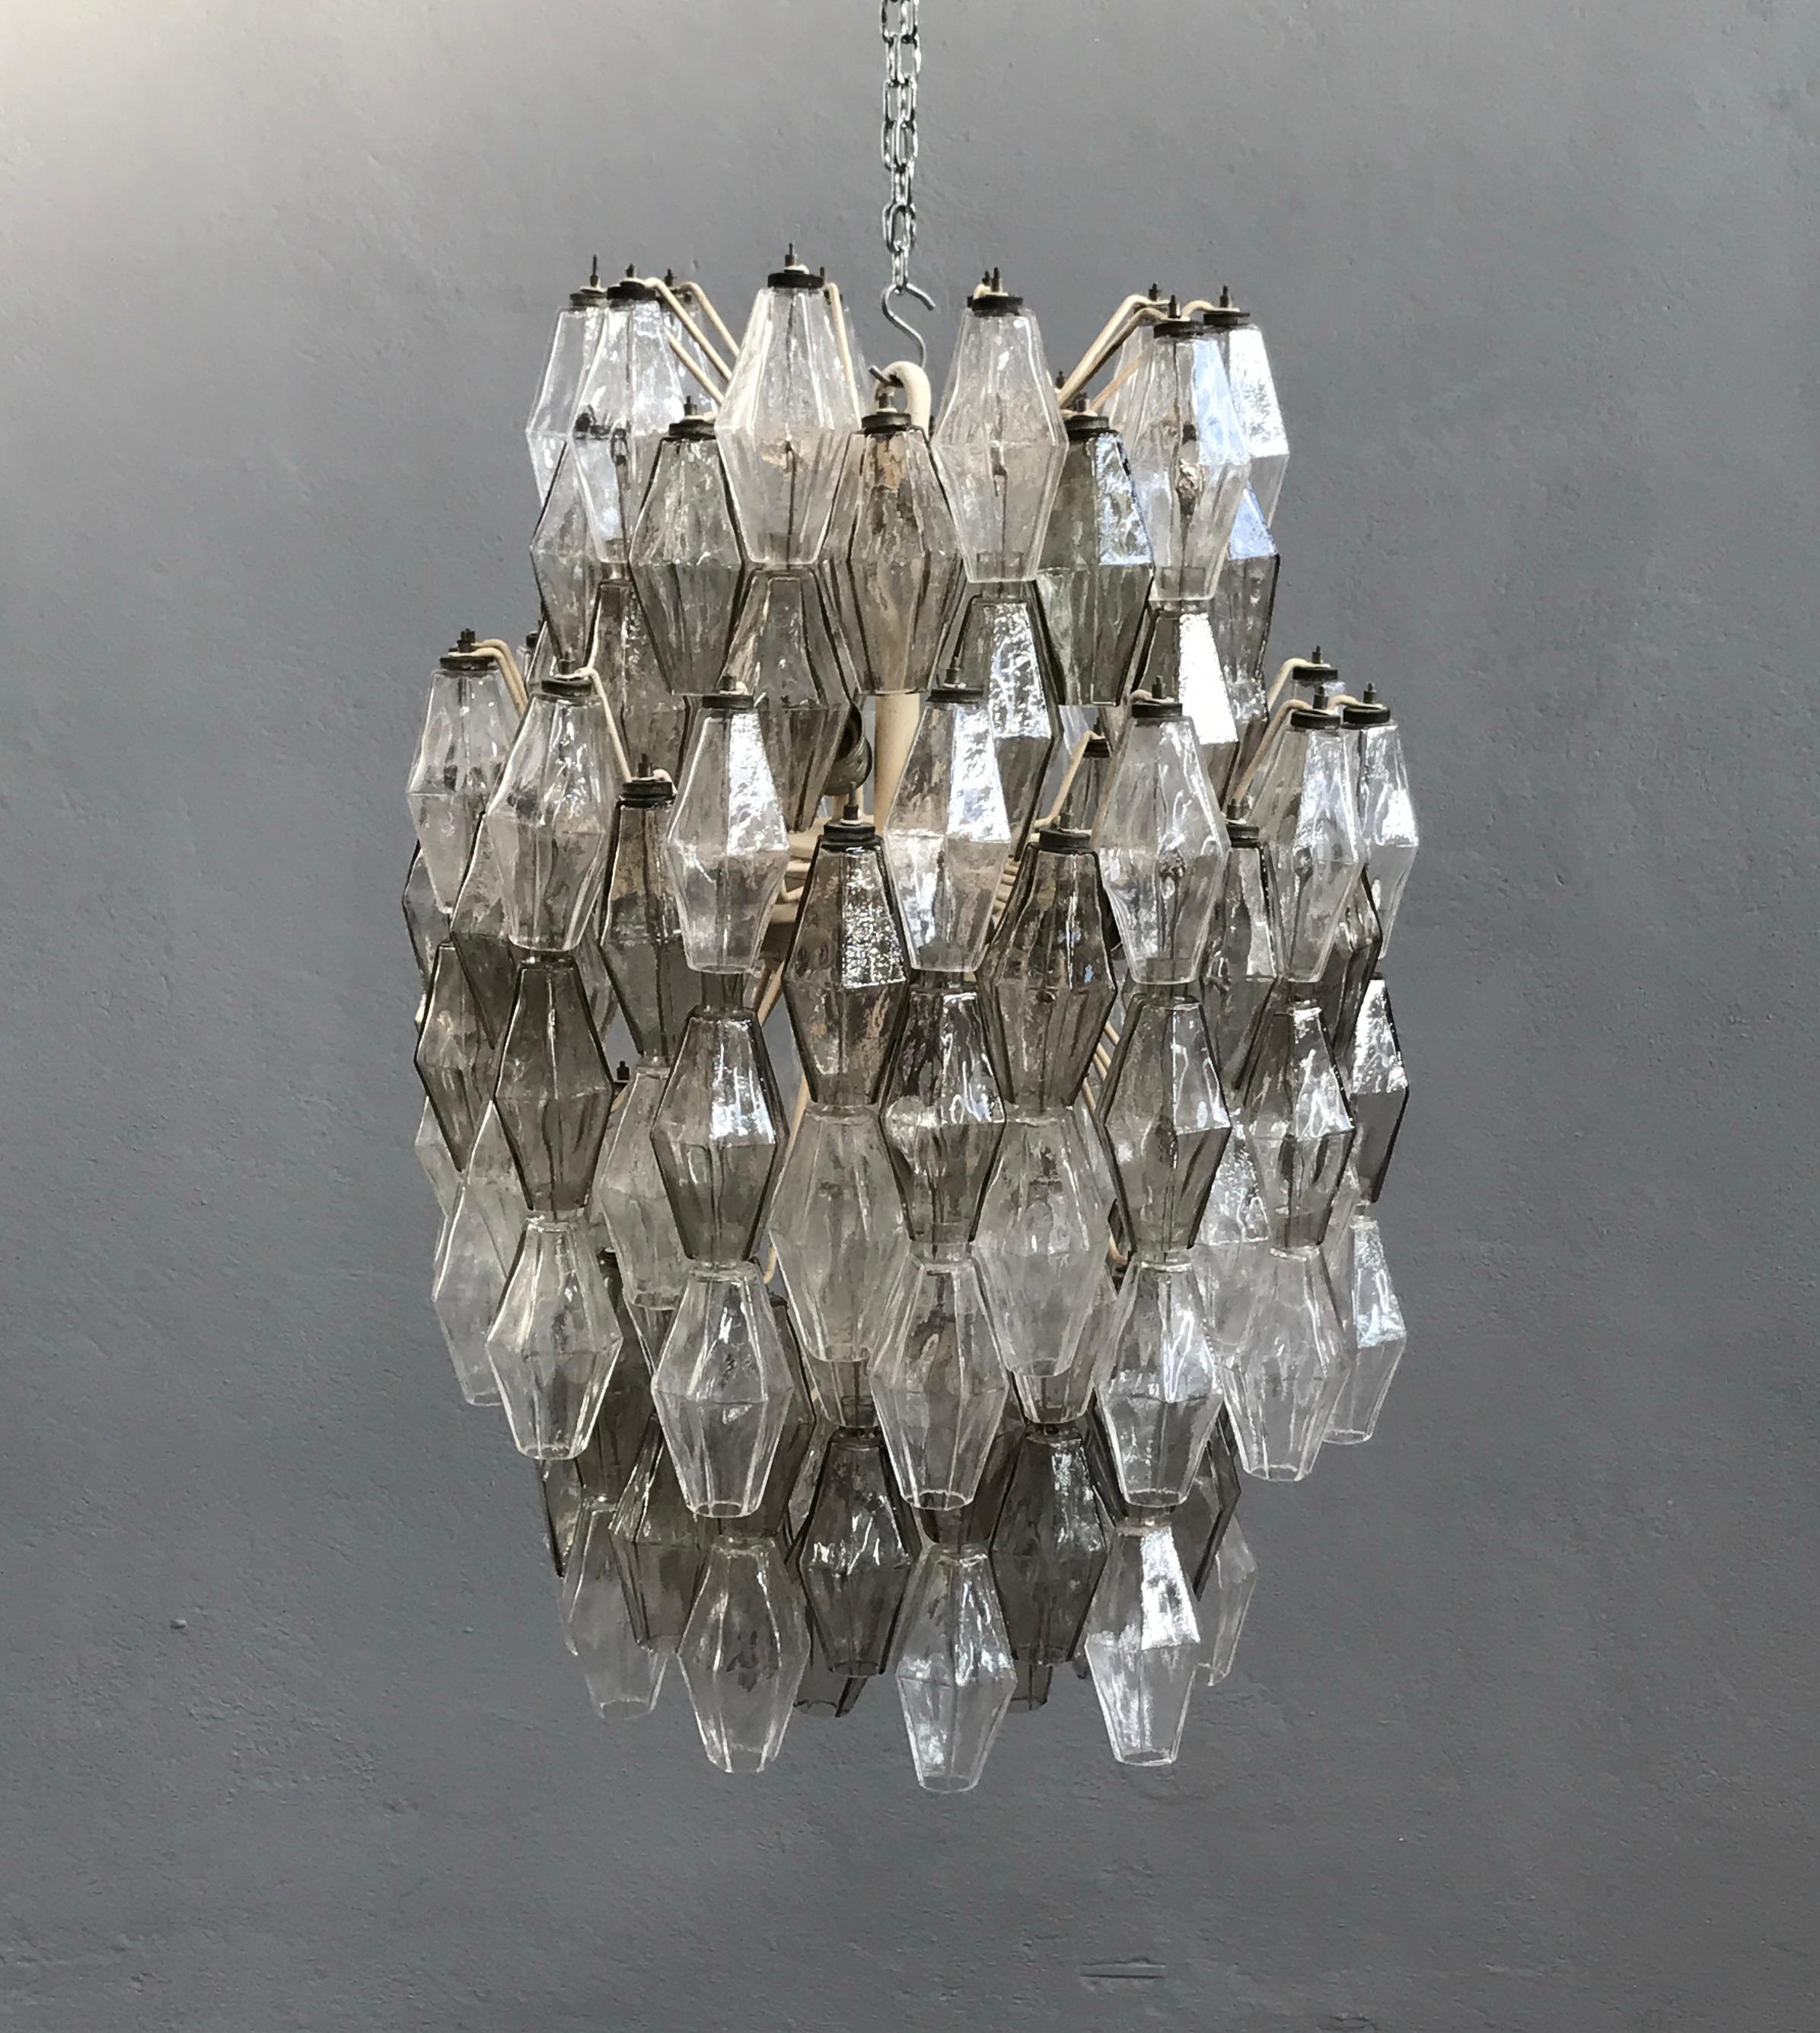 Two-color Poliedri chandelier designed by Carlo Scarpa for Venini.
Painted metal structure marked 